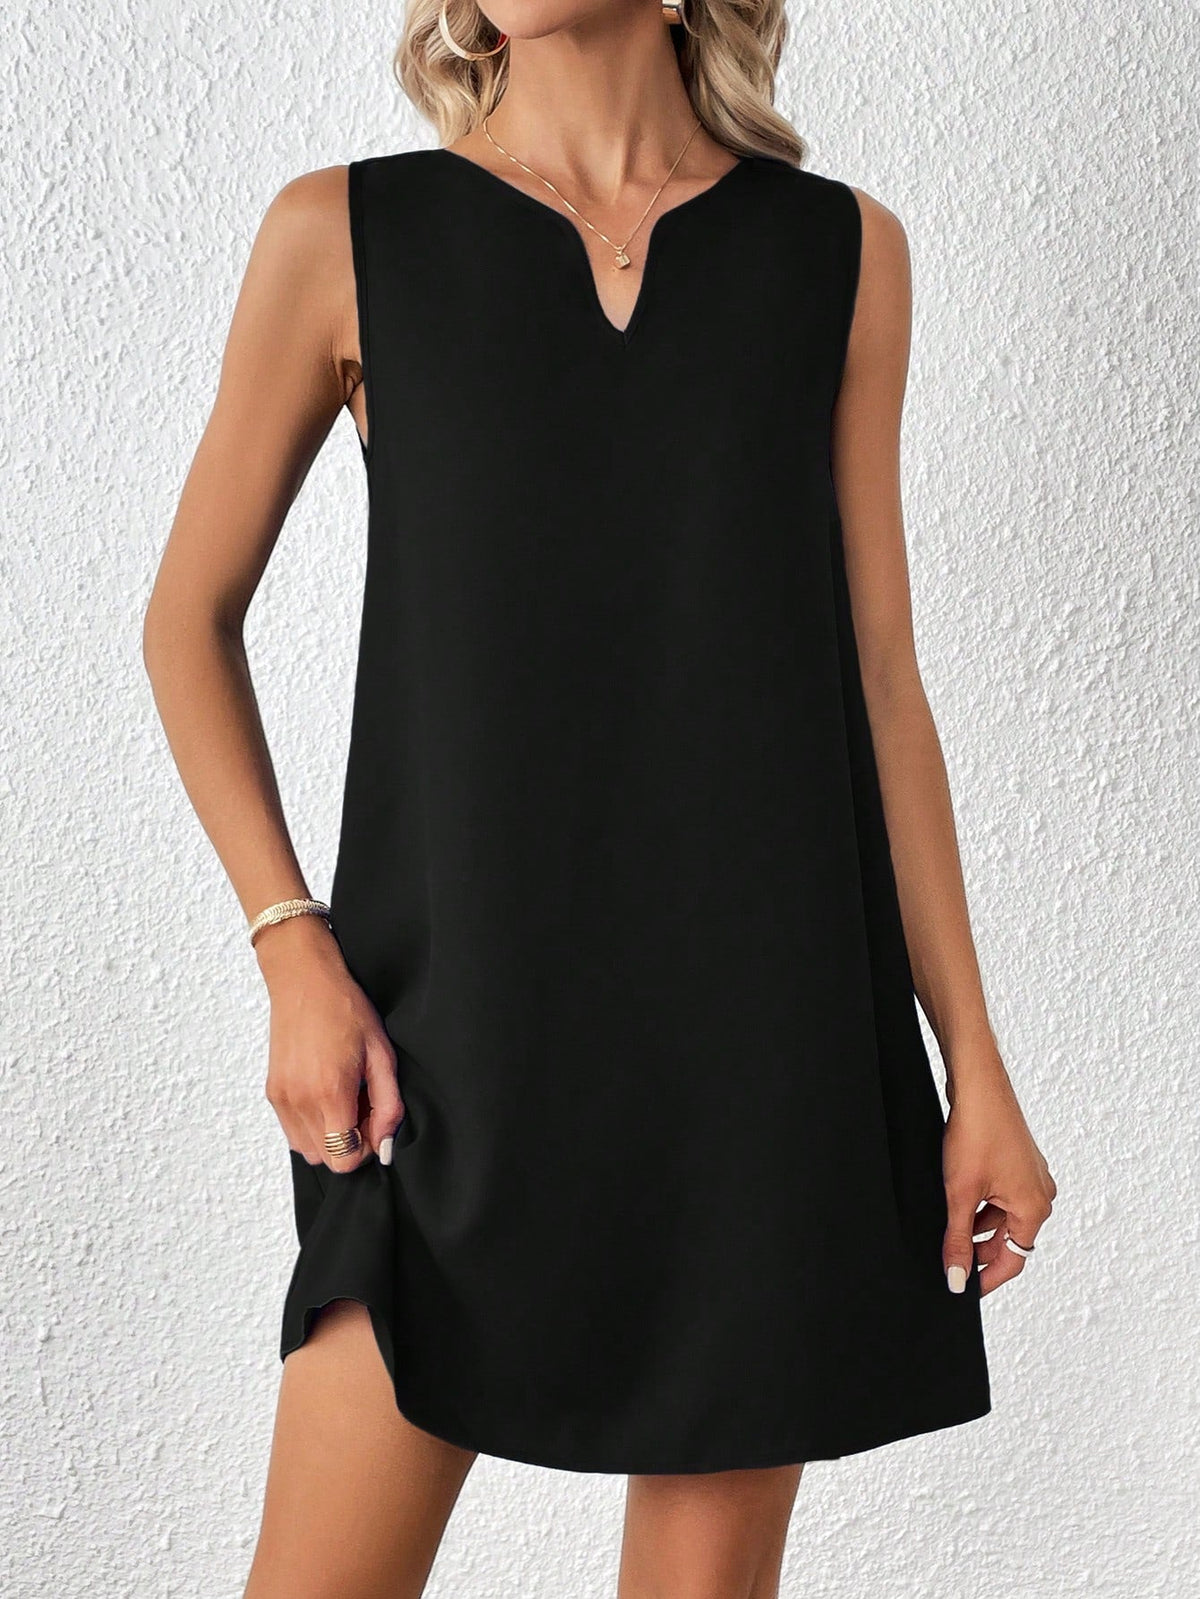 Casual Sleeveless Tank Dress - Notched Neckline, Recycled Material, Short Length